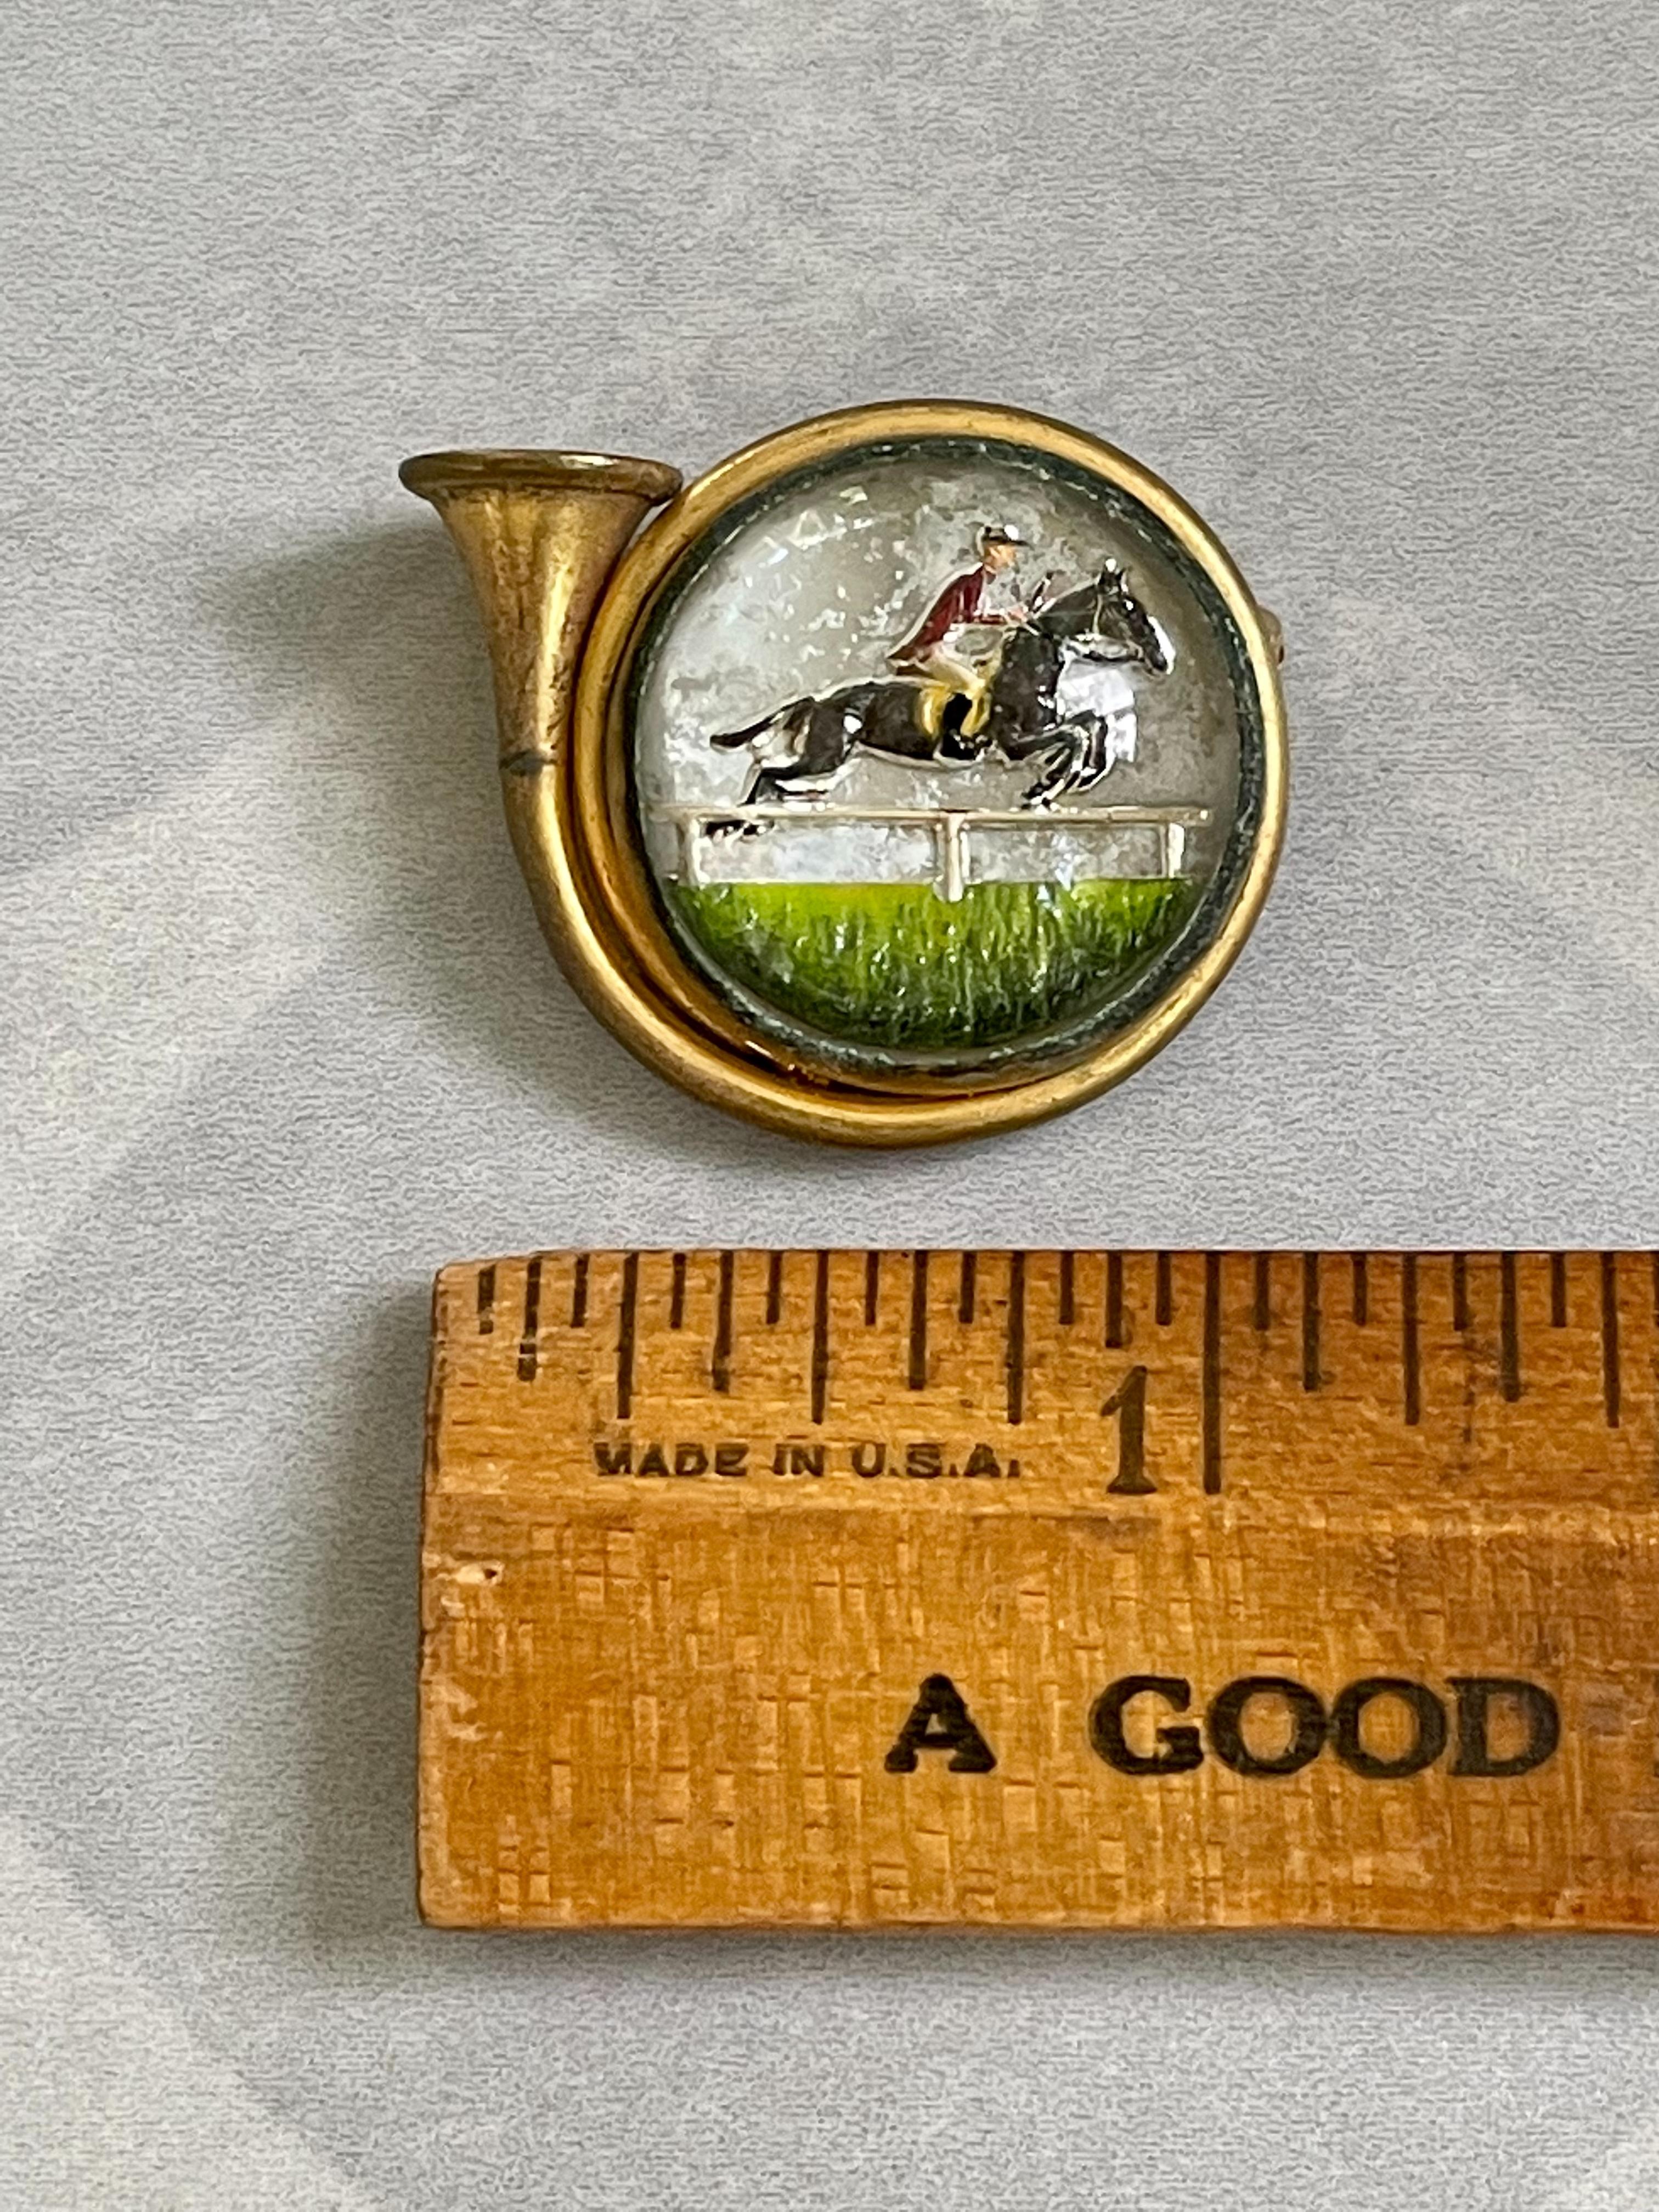 Vintage French Horn Reverse Painted Essex Crystal Brooch Pin with Horse, Rider For Sale 3